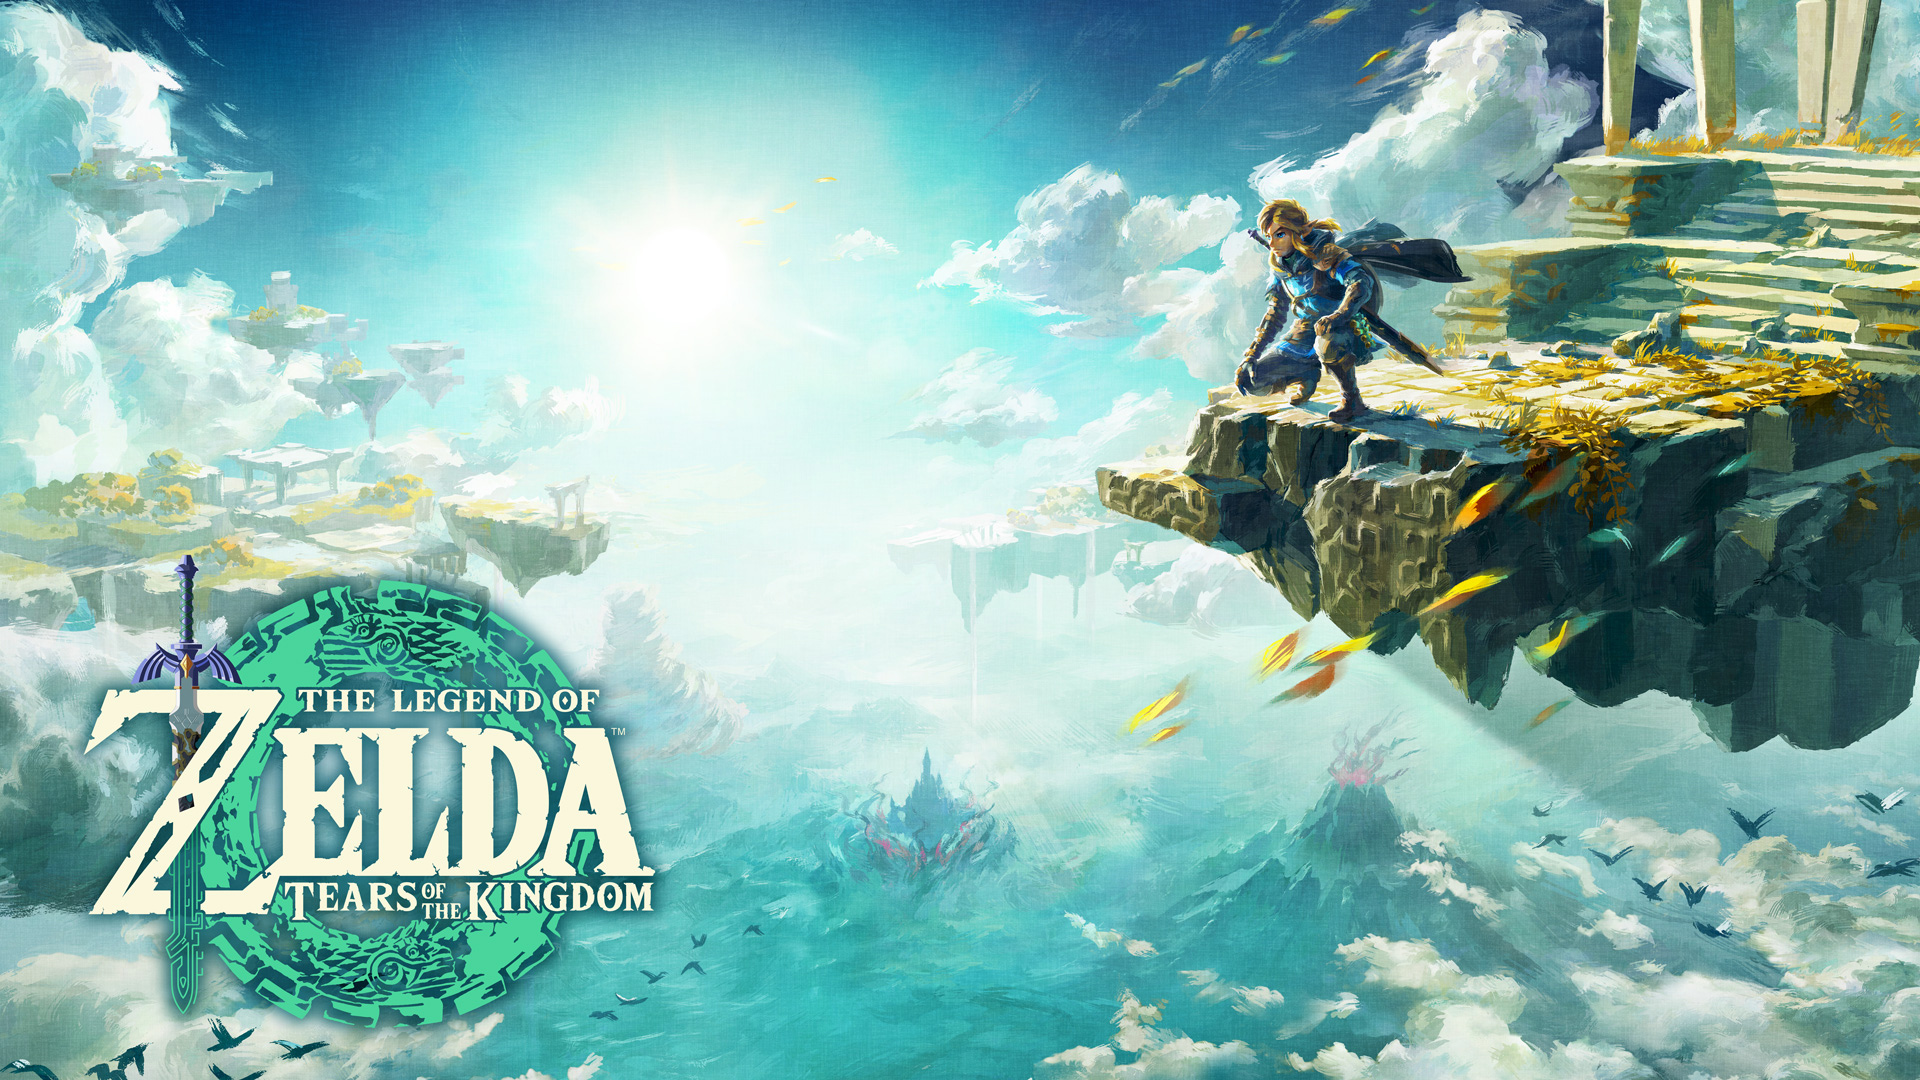 General 1920x1080 Link The Legend of Zelda: Breath of the Wild The Legend of Zelda Nintendo Nintendo Switch video game art video game characters video game men The Legend of Zelda: Tears of the Kingdom video games